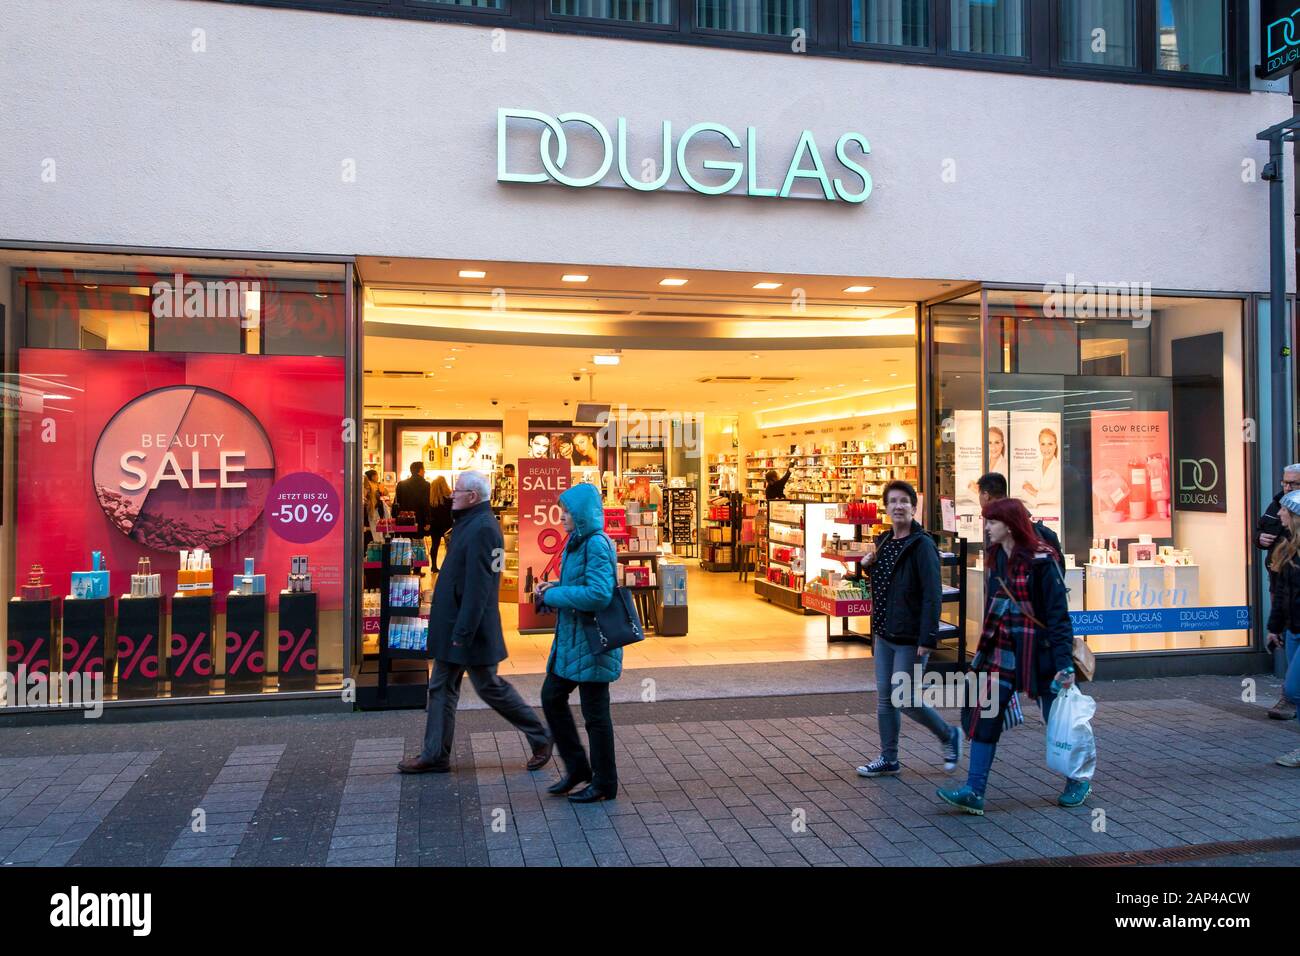 the perfumery Douglas on the shopping street Hohe Strasse, Cologne, Germany.  die Parfuemerie Douglas auf der Einkaufsstrasse Hohe Strasse, Koeln, Deu Stock Photo